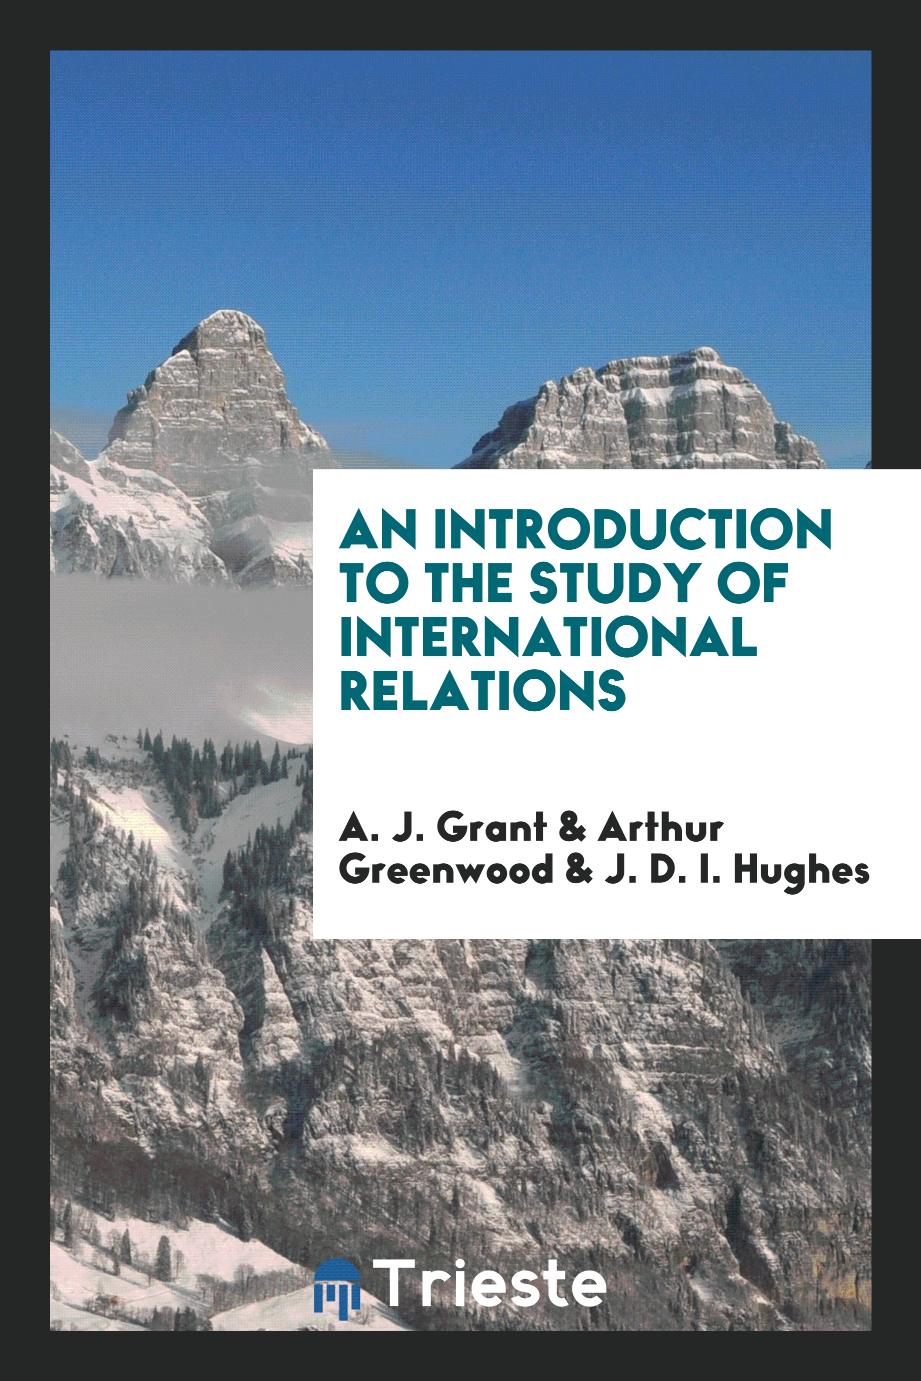 An introduction to the study of international relations